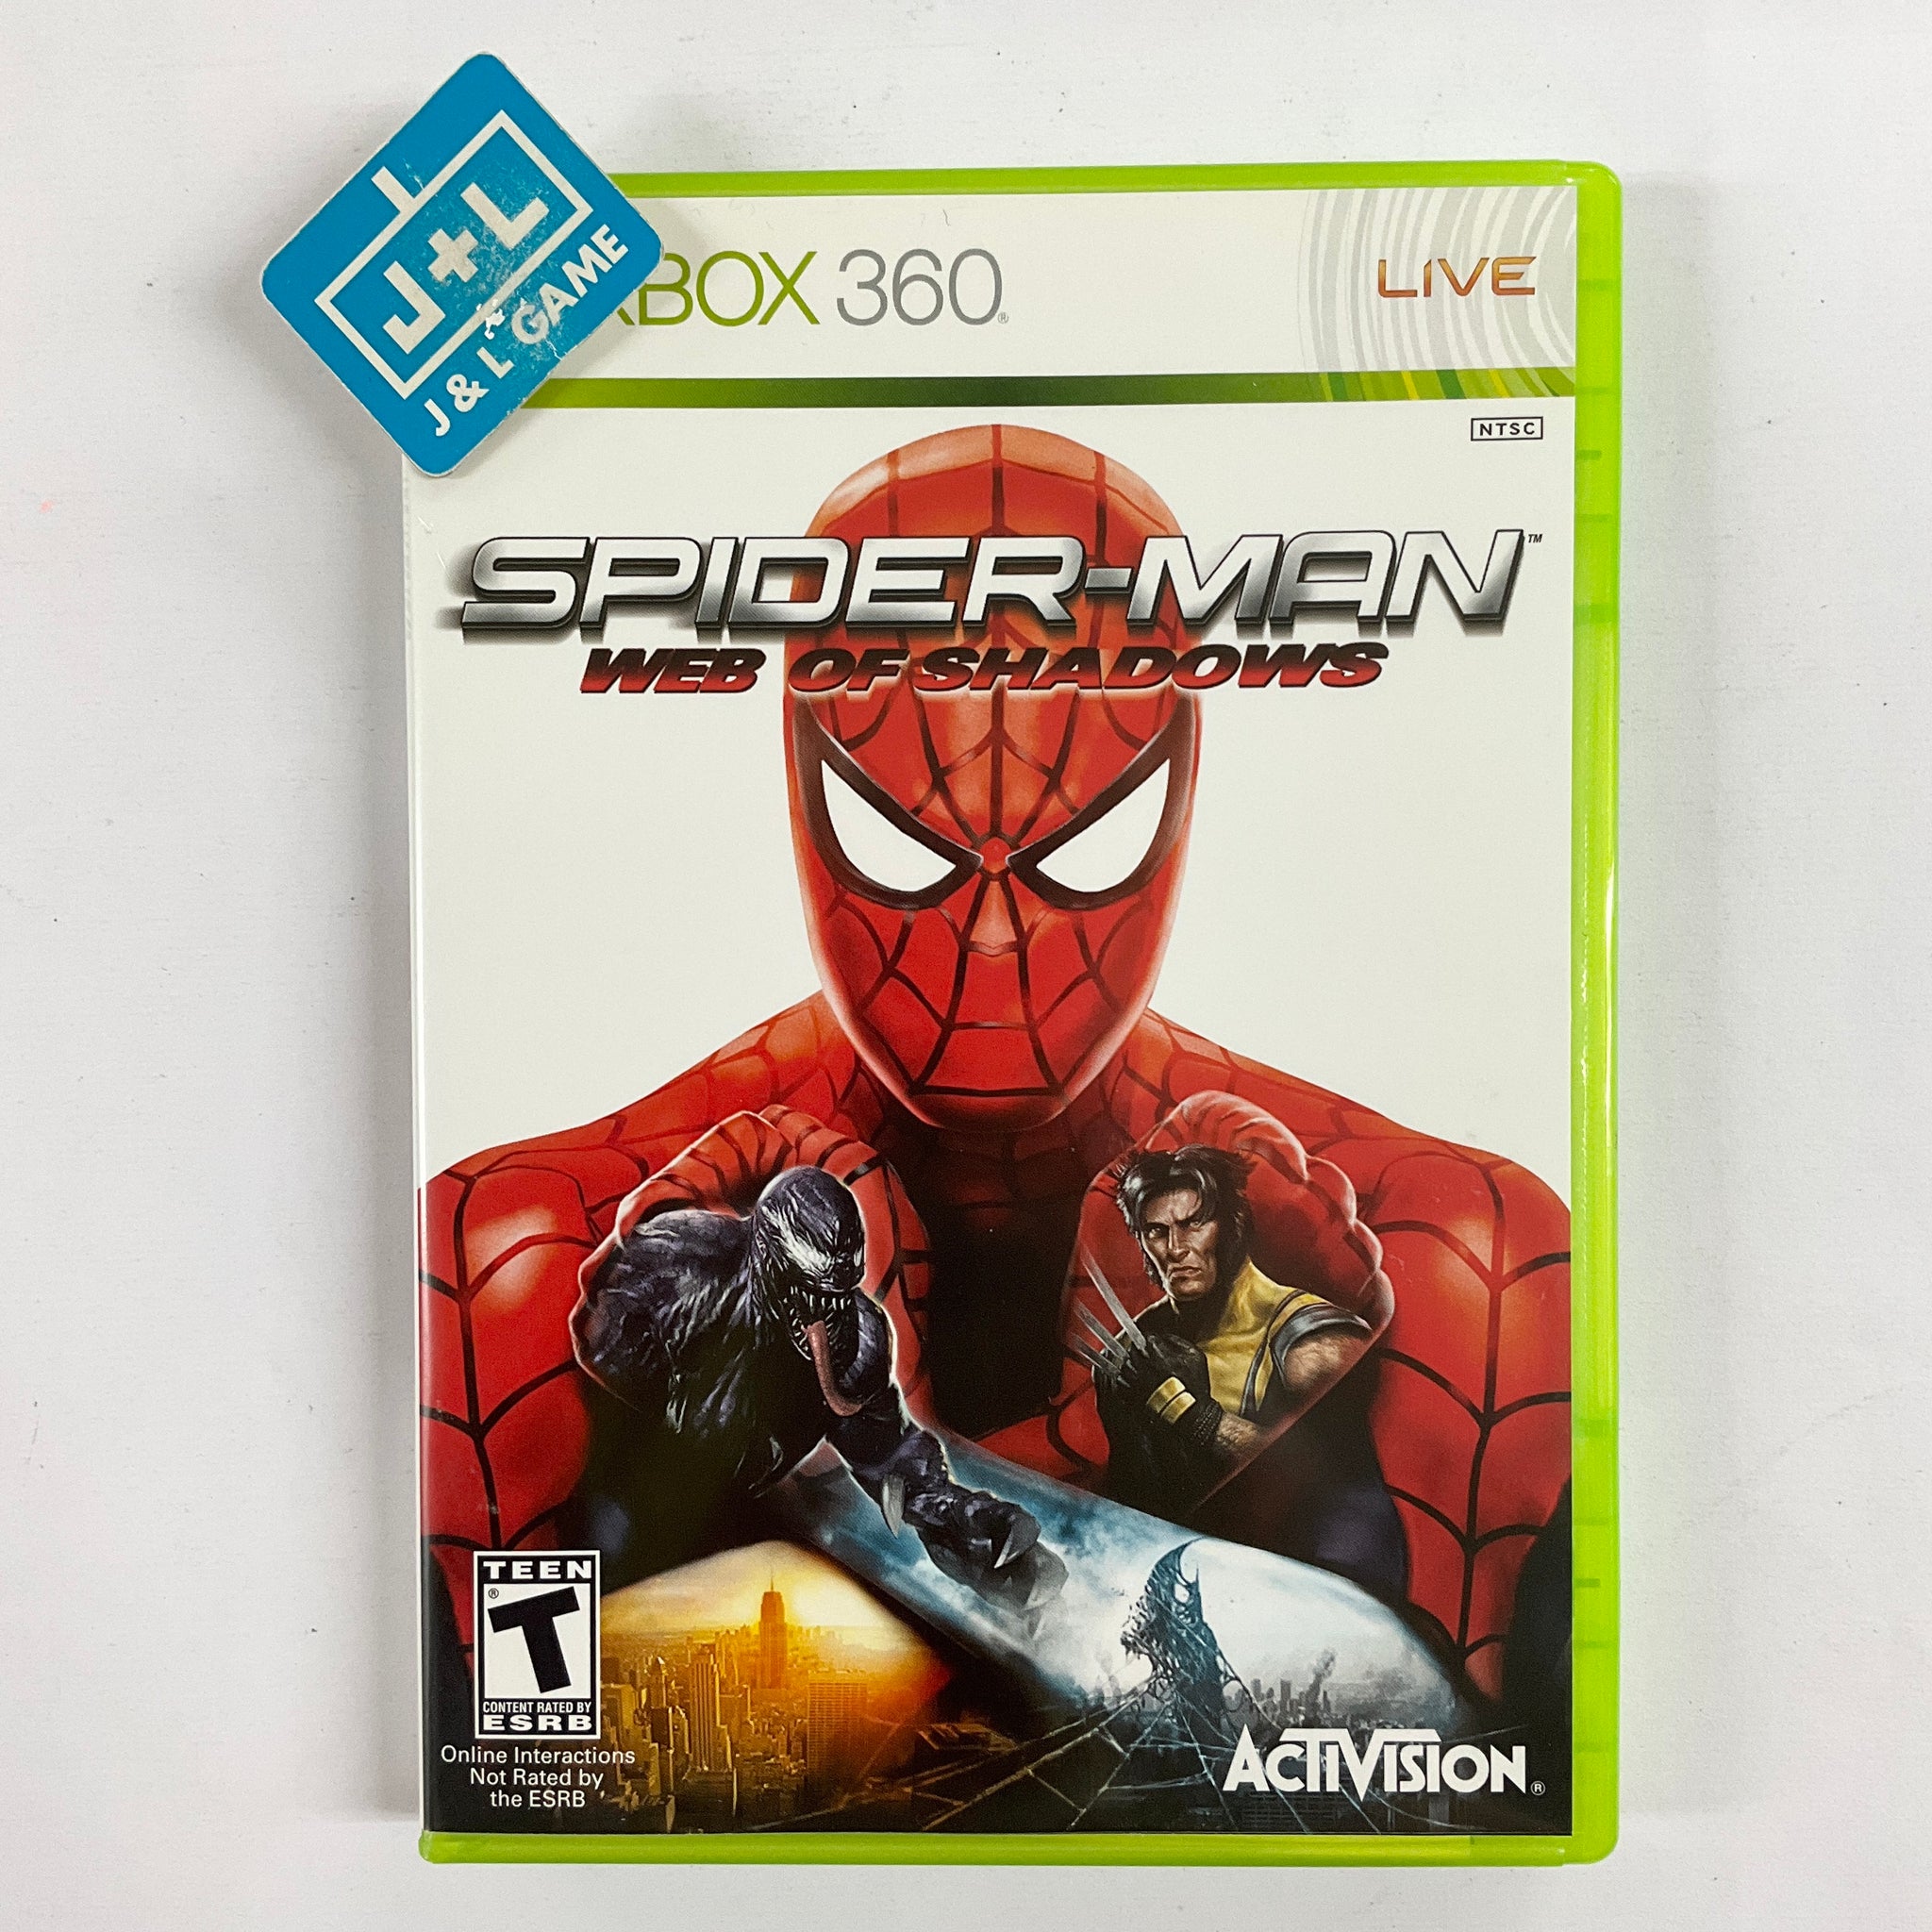 Spider-Man: Web of Shadows for Xbox 360